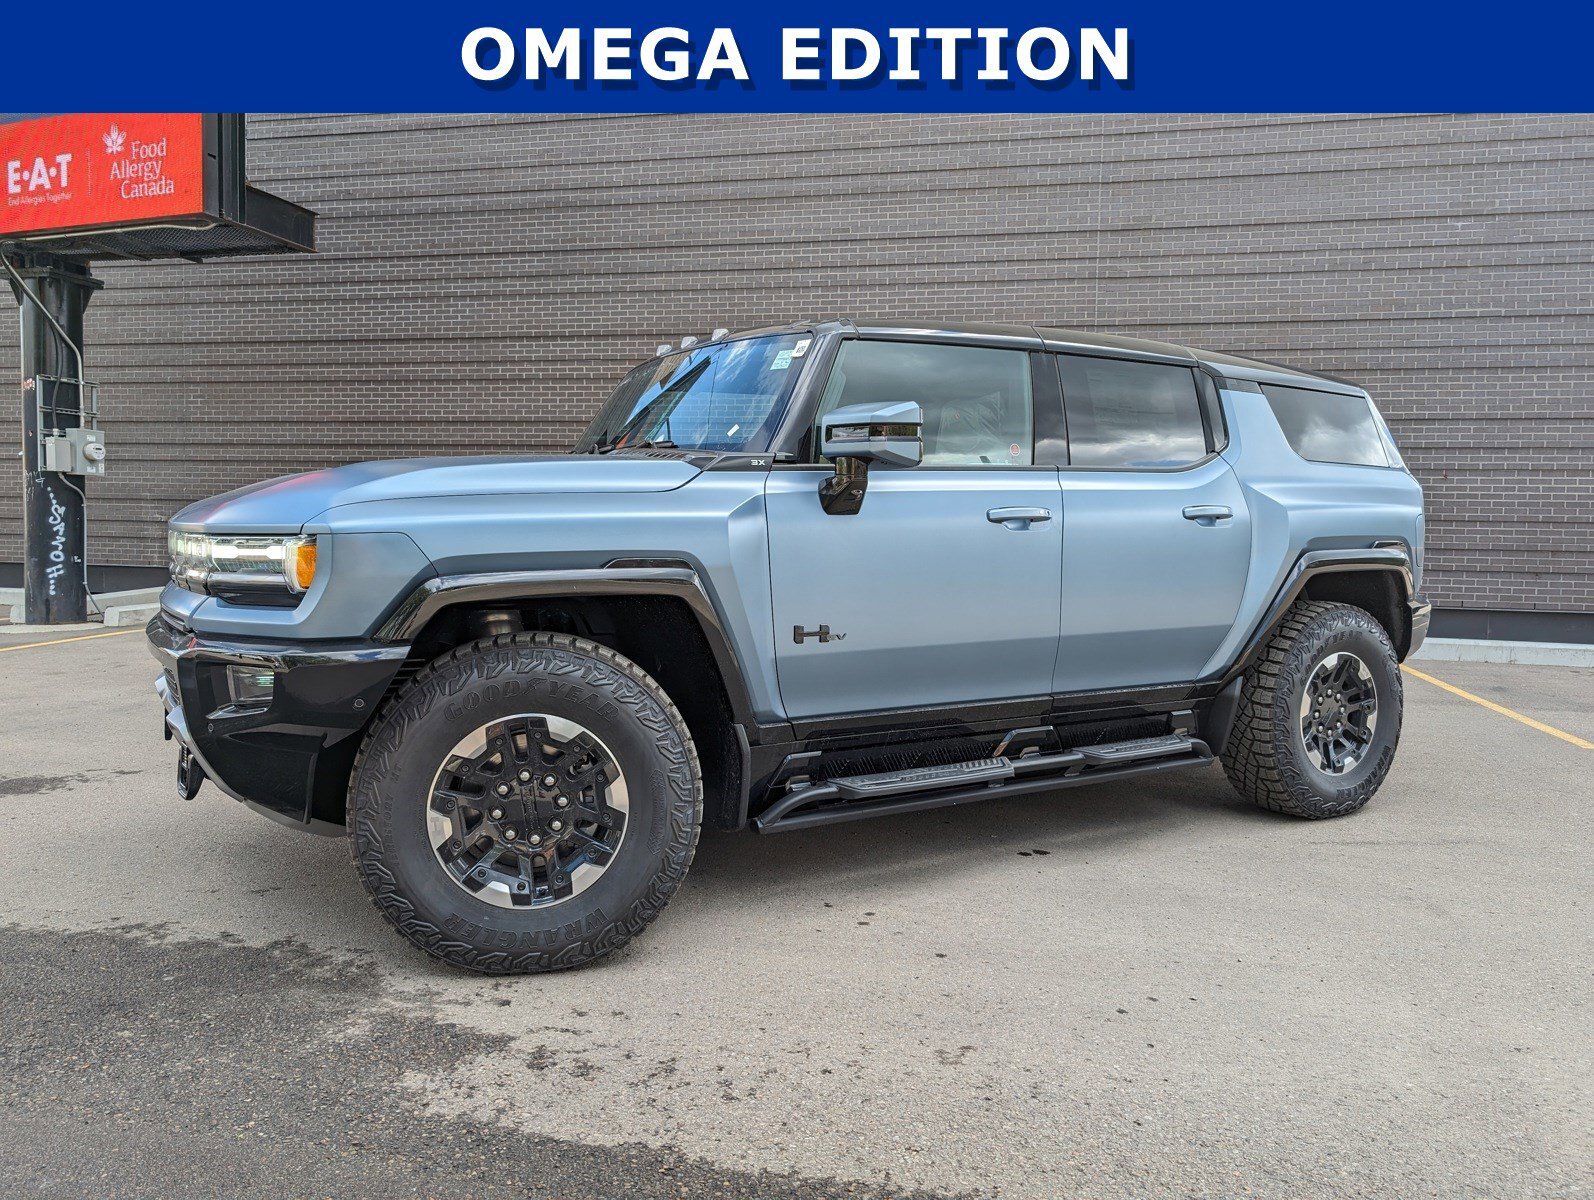 2024 GMC HUMMER EV SUV 3X Omega Edition - Extreme Off-Road Package 4x4 Su